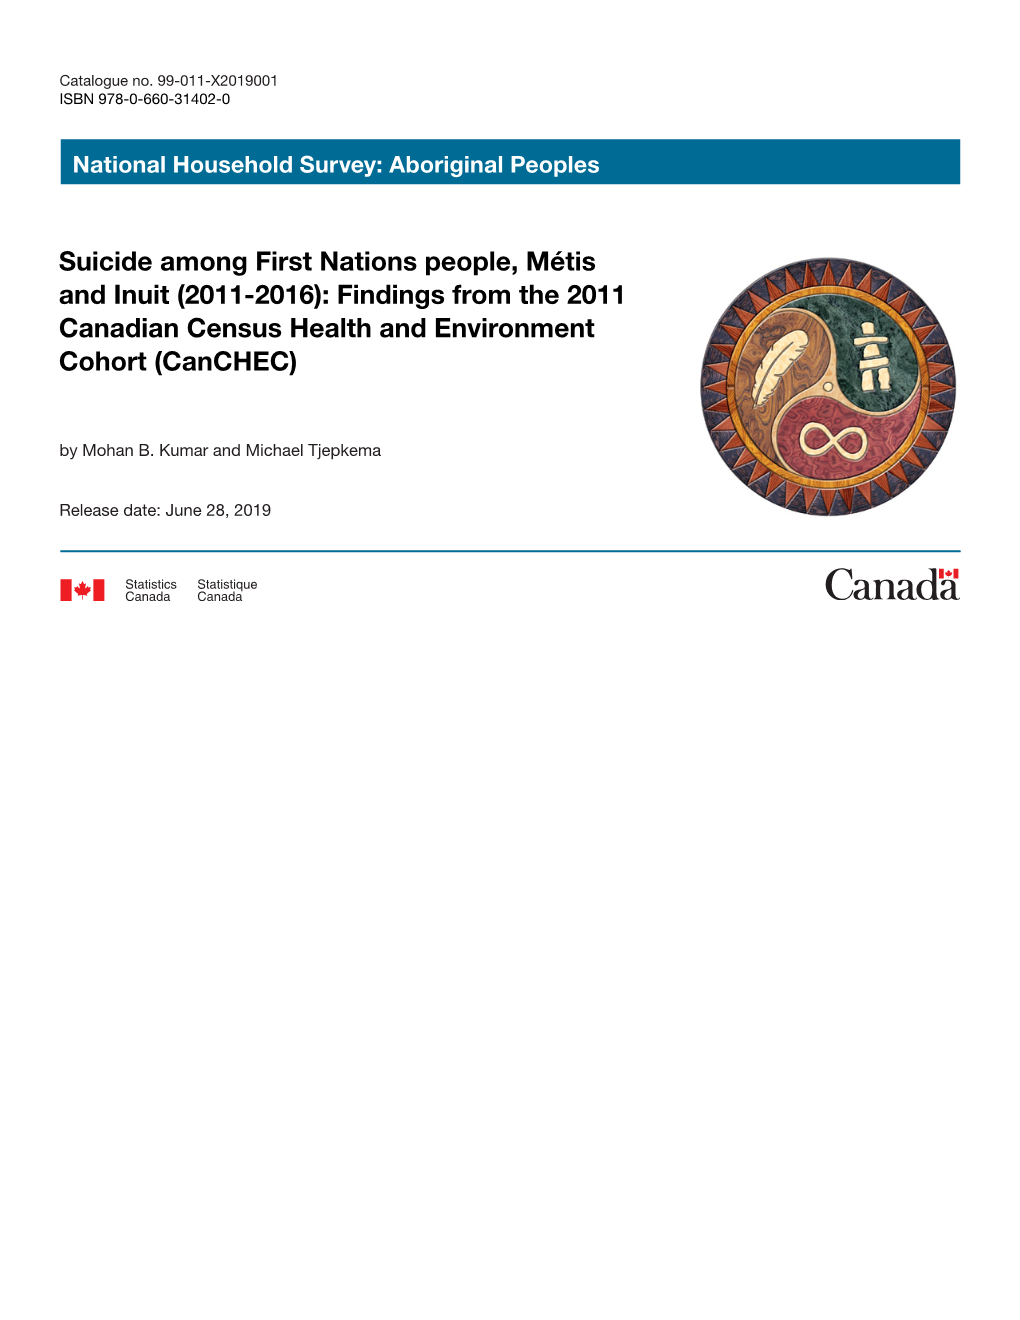 Suicide Among First Nations People, Métis and Inuit (2011-2016): Findings from the 2011 Canadian Census Health and Environment Cohort (Canchec)